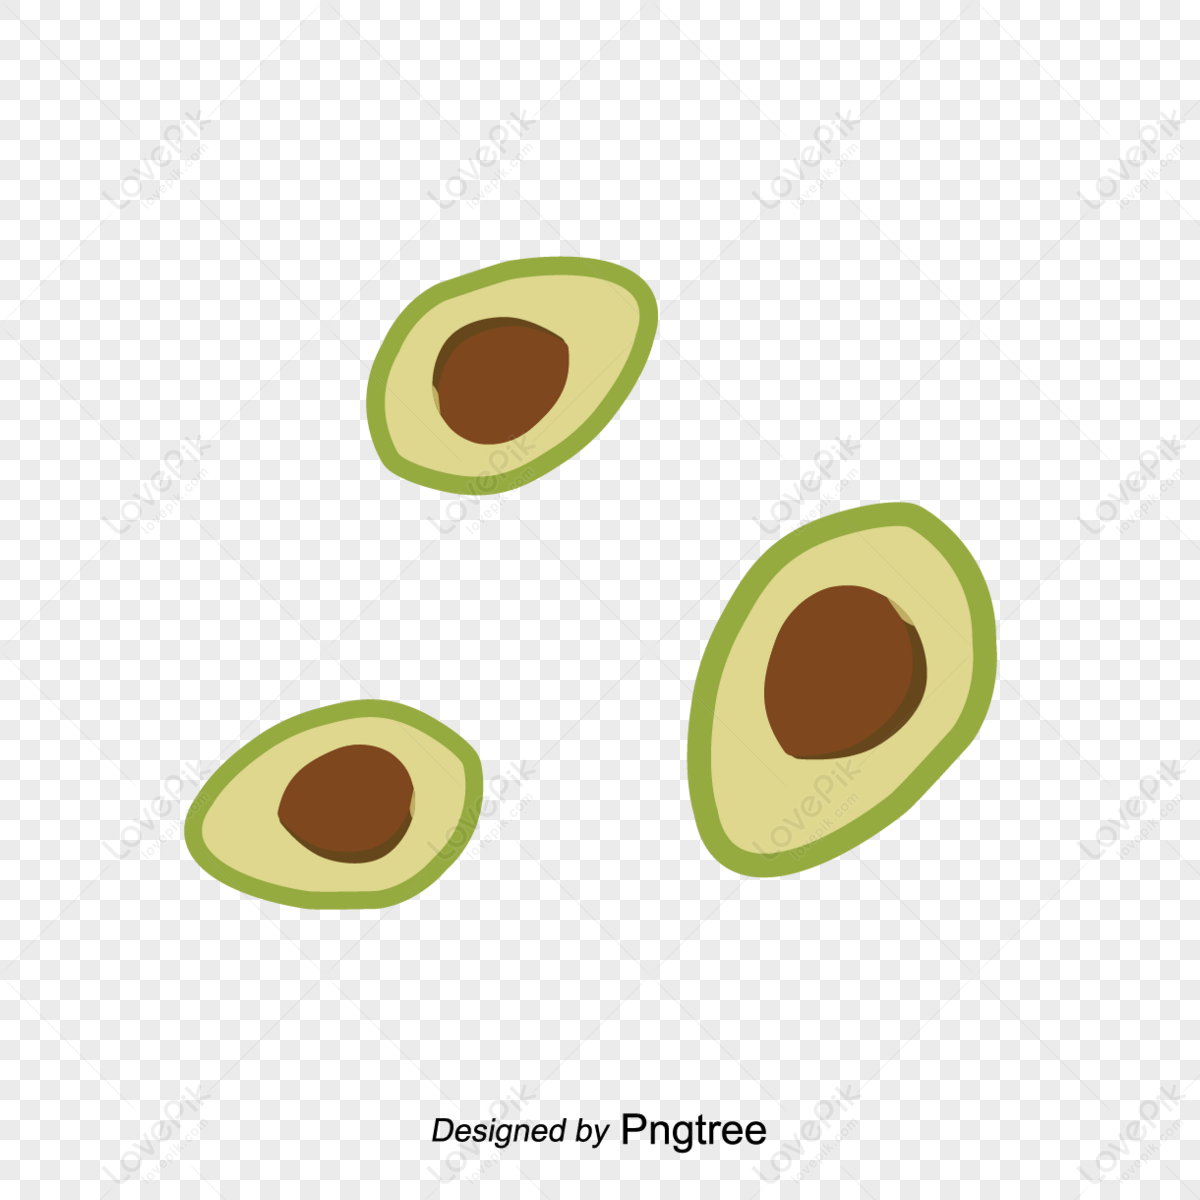 Fresh Avocado PNG Images With Transparent Background